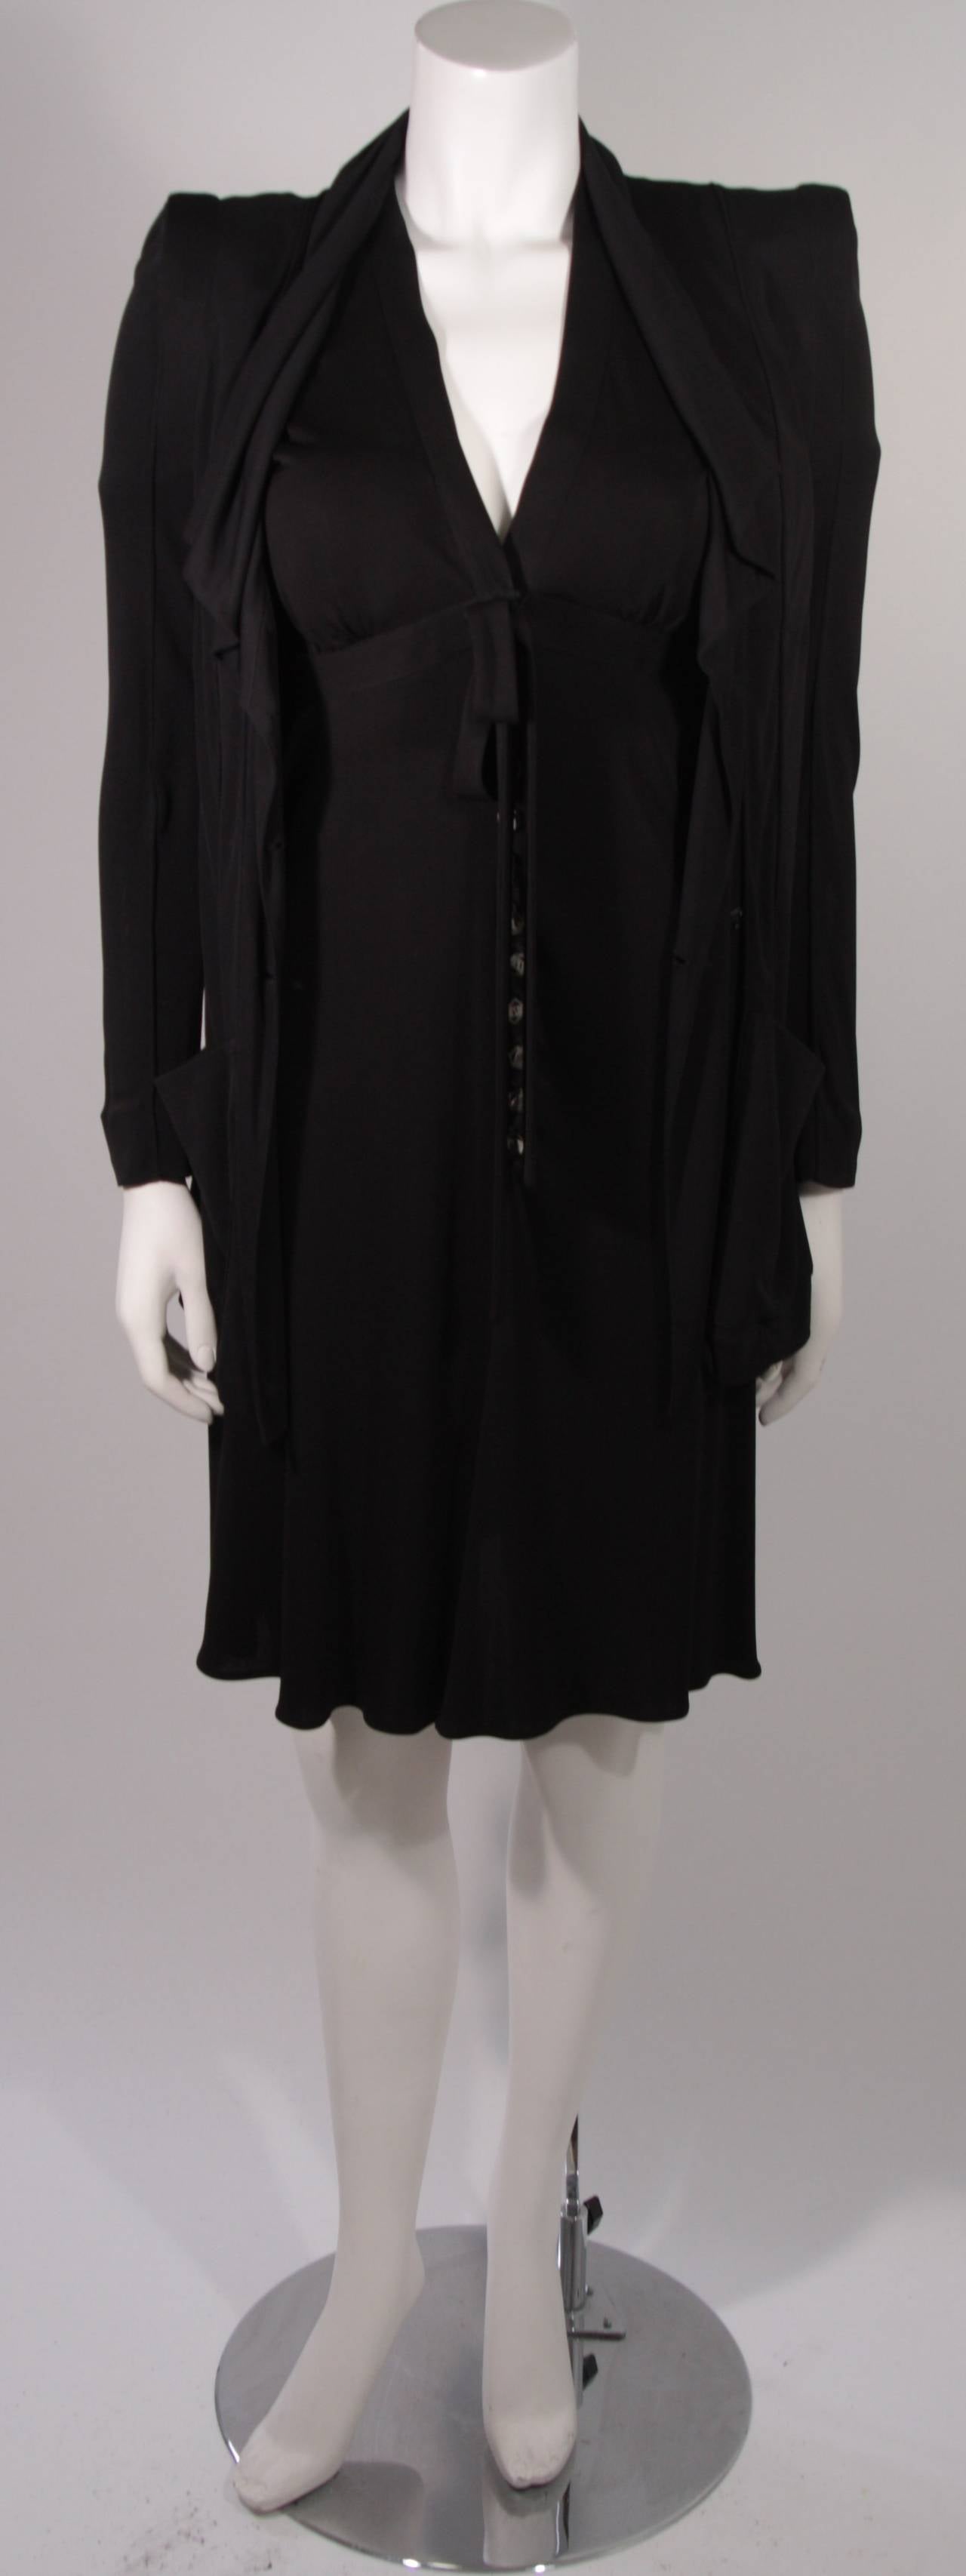 Women's Lagerfield Black Jersey Dress and Jacket Ensemble Size 36 For Sale